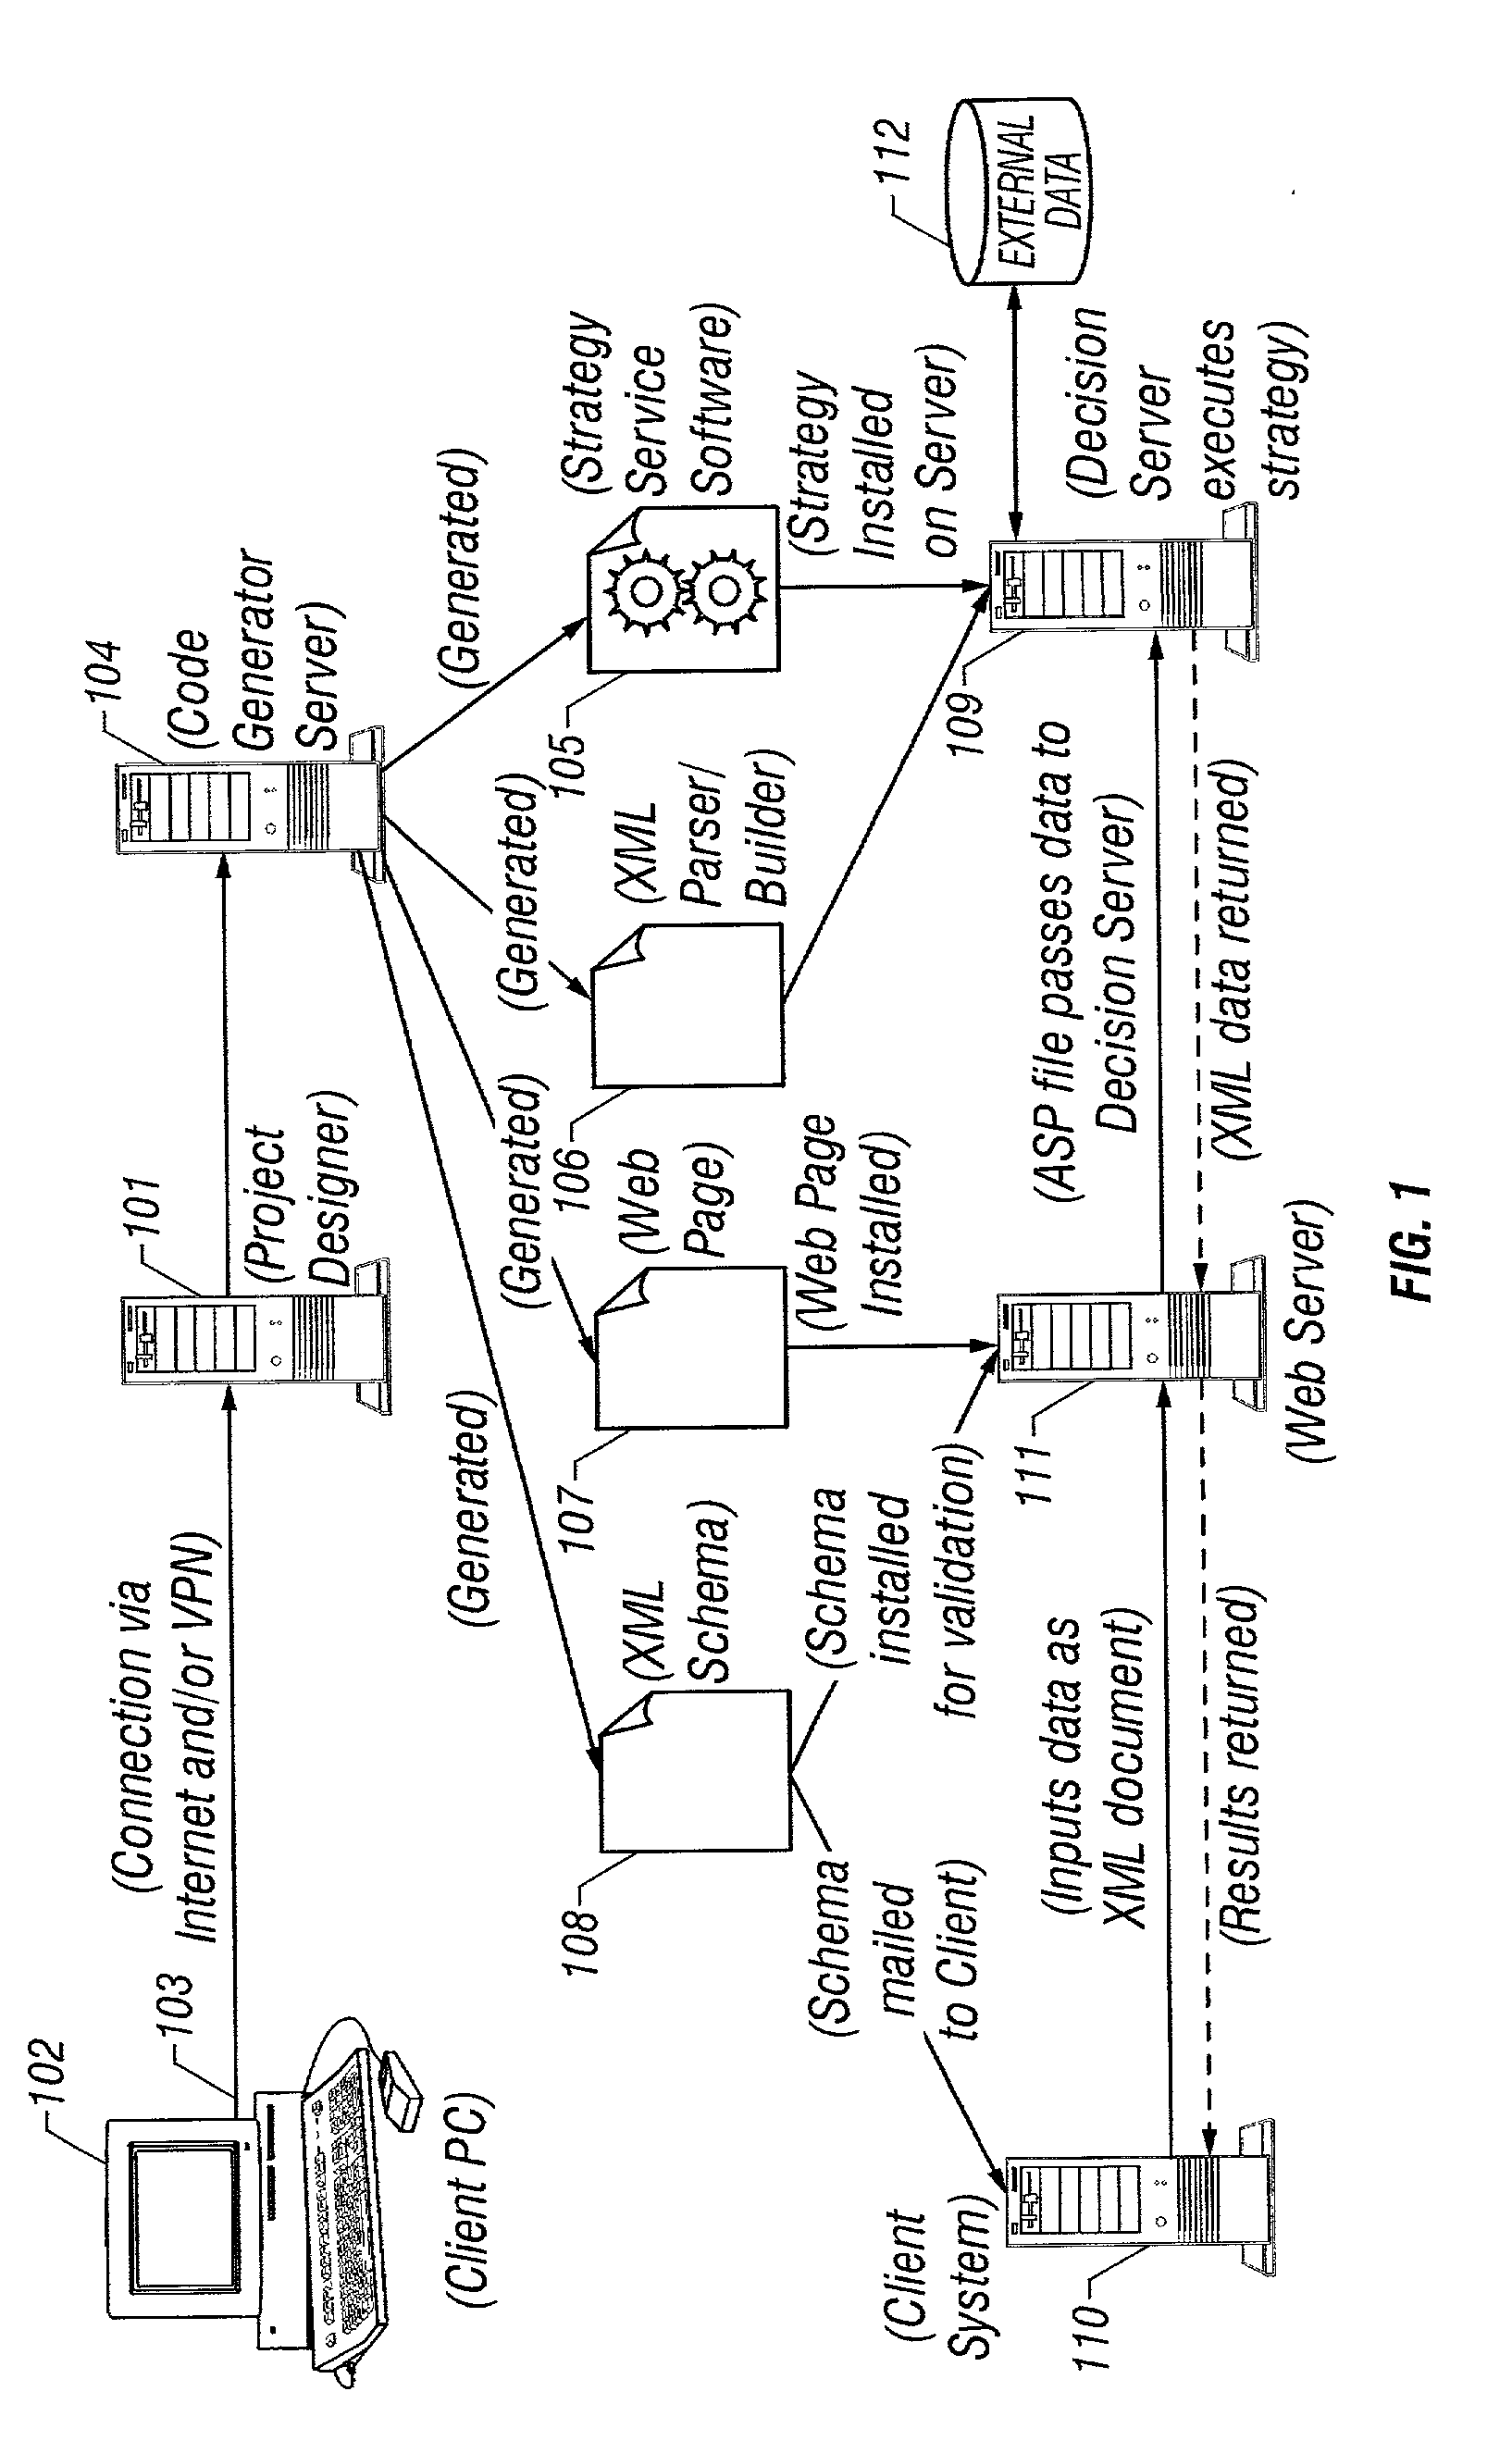 Decision service method and system